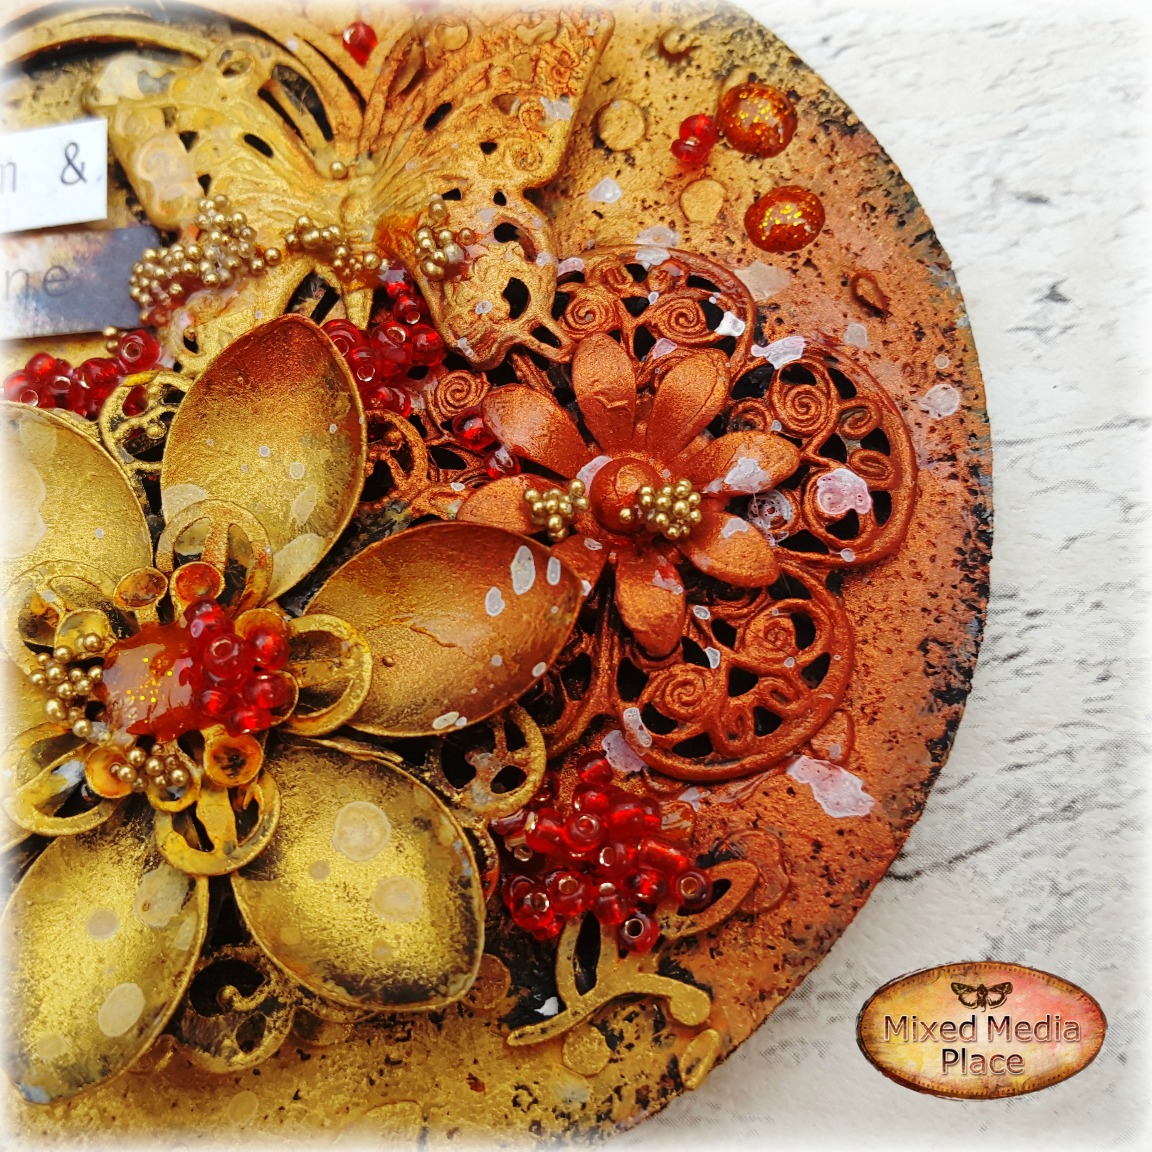 Mixed Media Place: Altered coasters by Ludivine